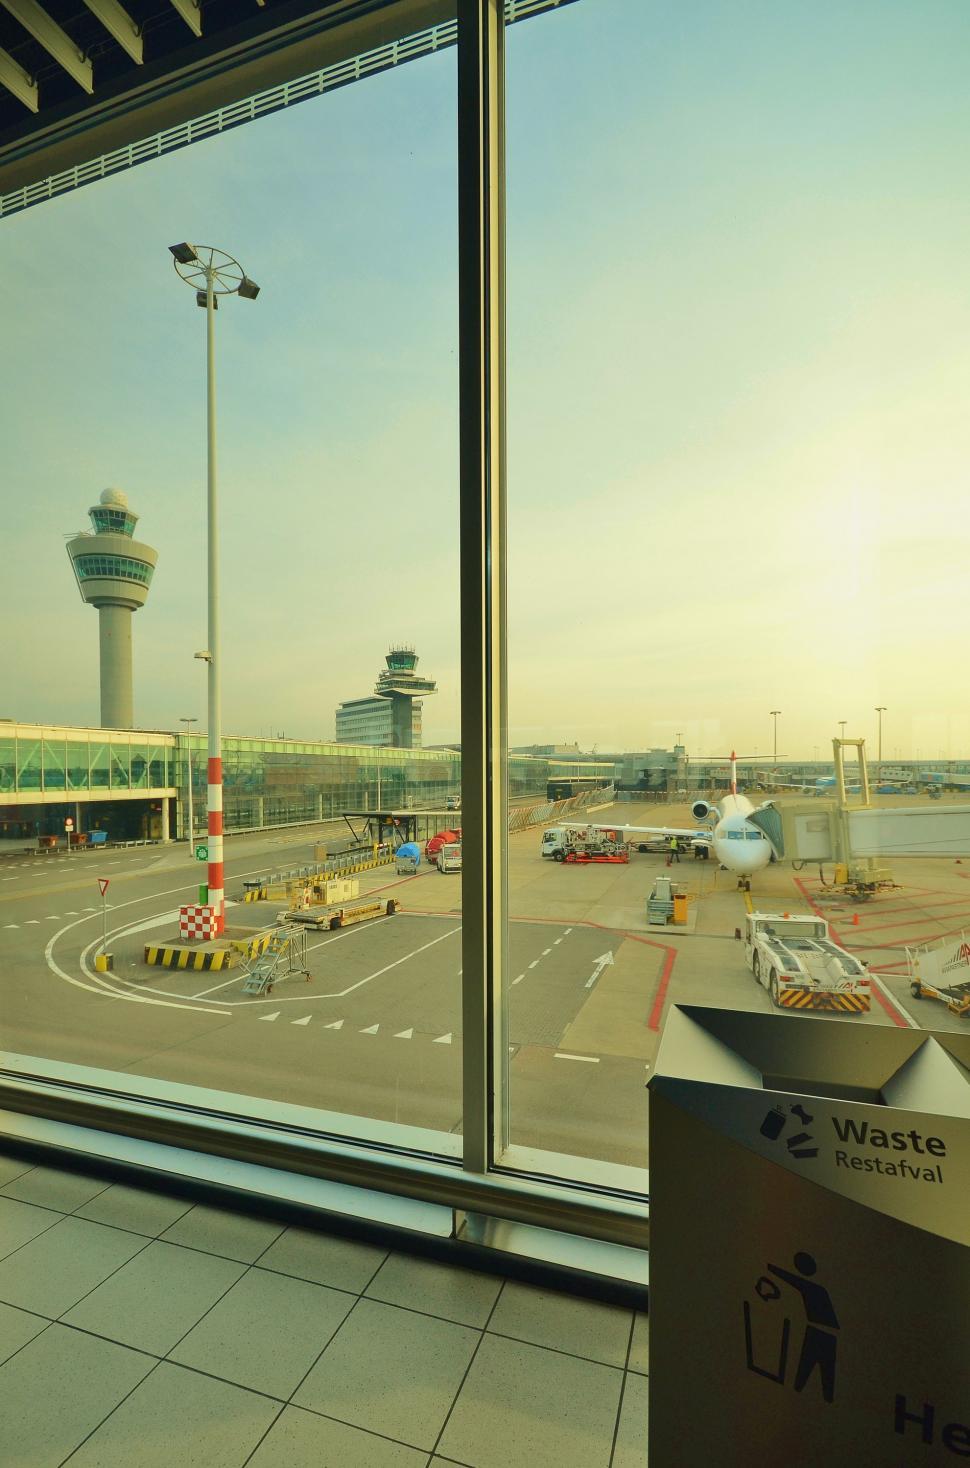 Free Image of A View of an Airport Through a Window 